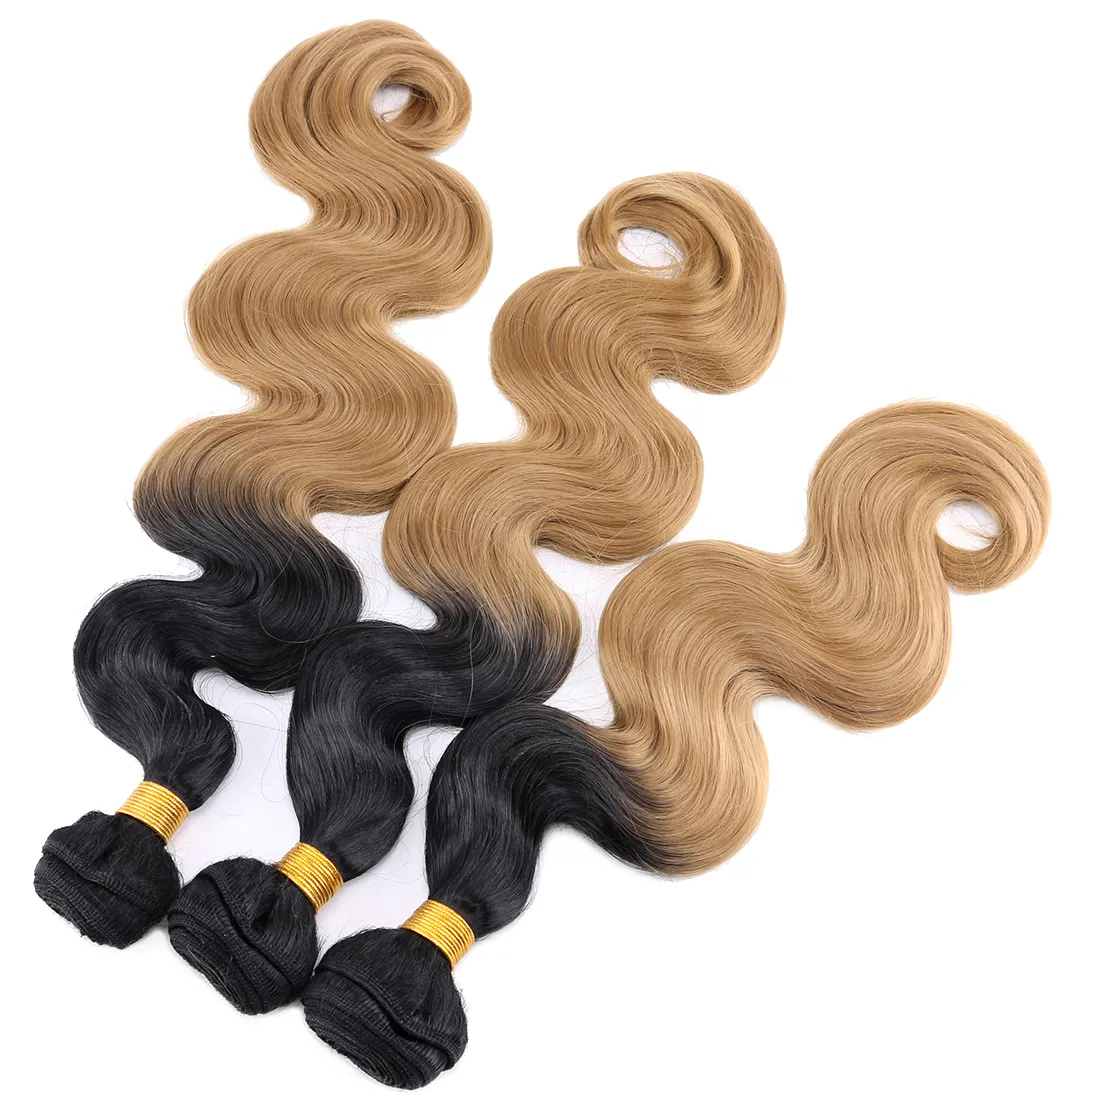 T1B/27 Synthetic Body Wave Bundles High Temperature Synthetic Hair Extensions For Black Women 16-20 Inches 100g/piece